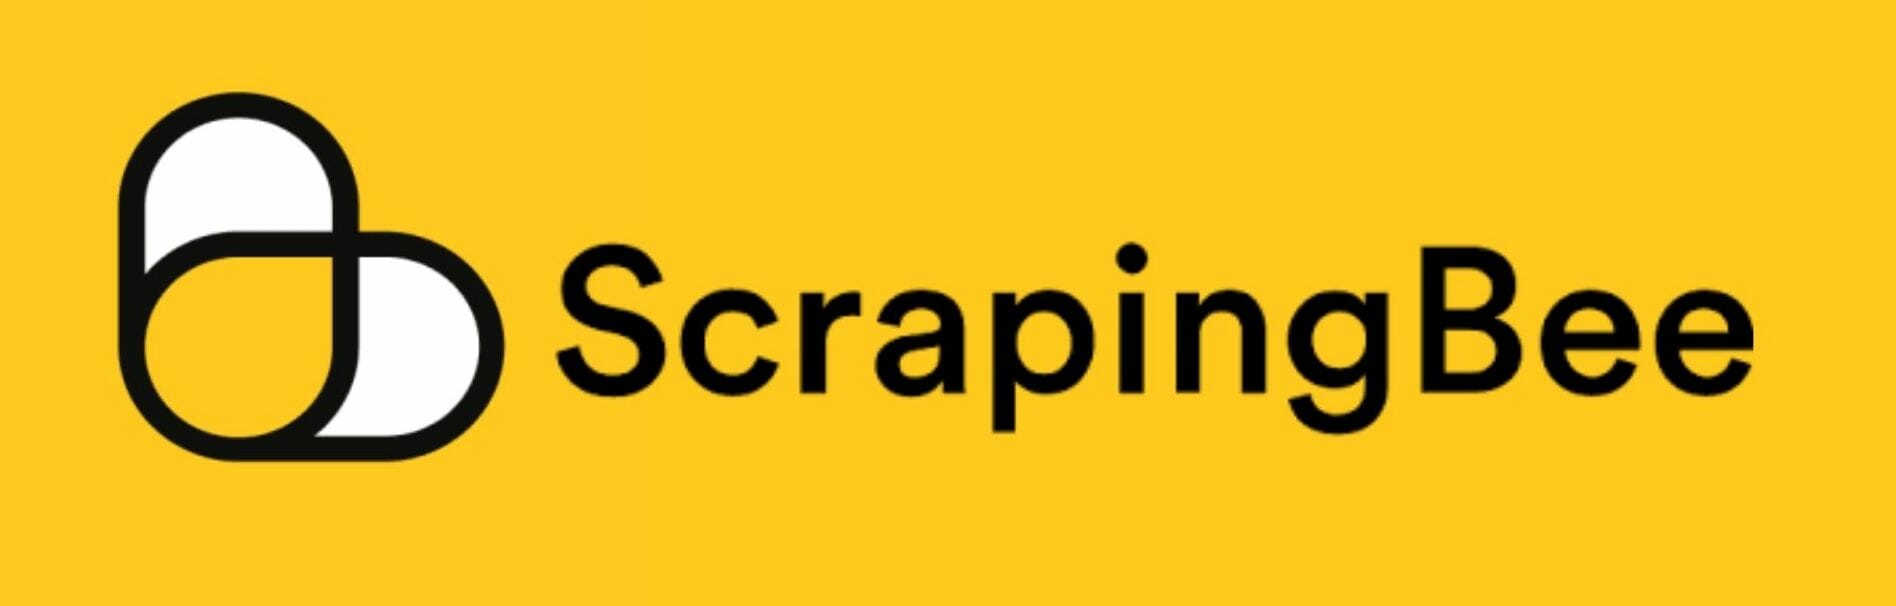 Scraping Bee logo on the yellow background